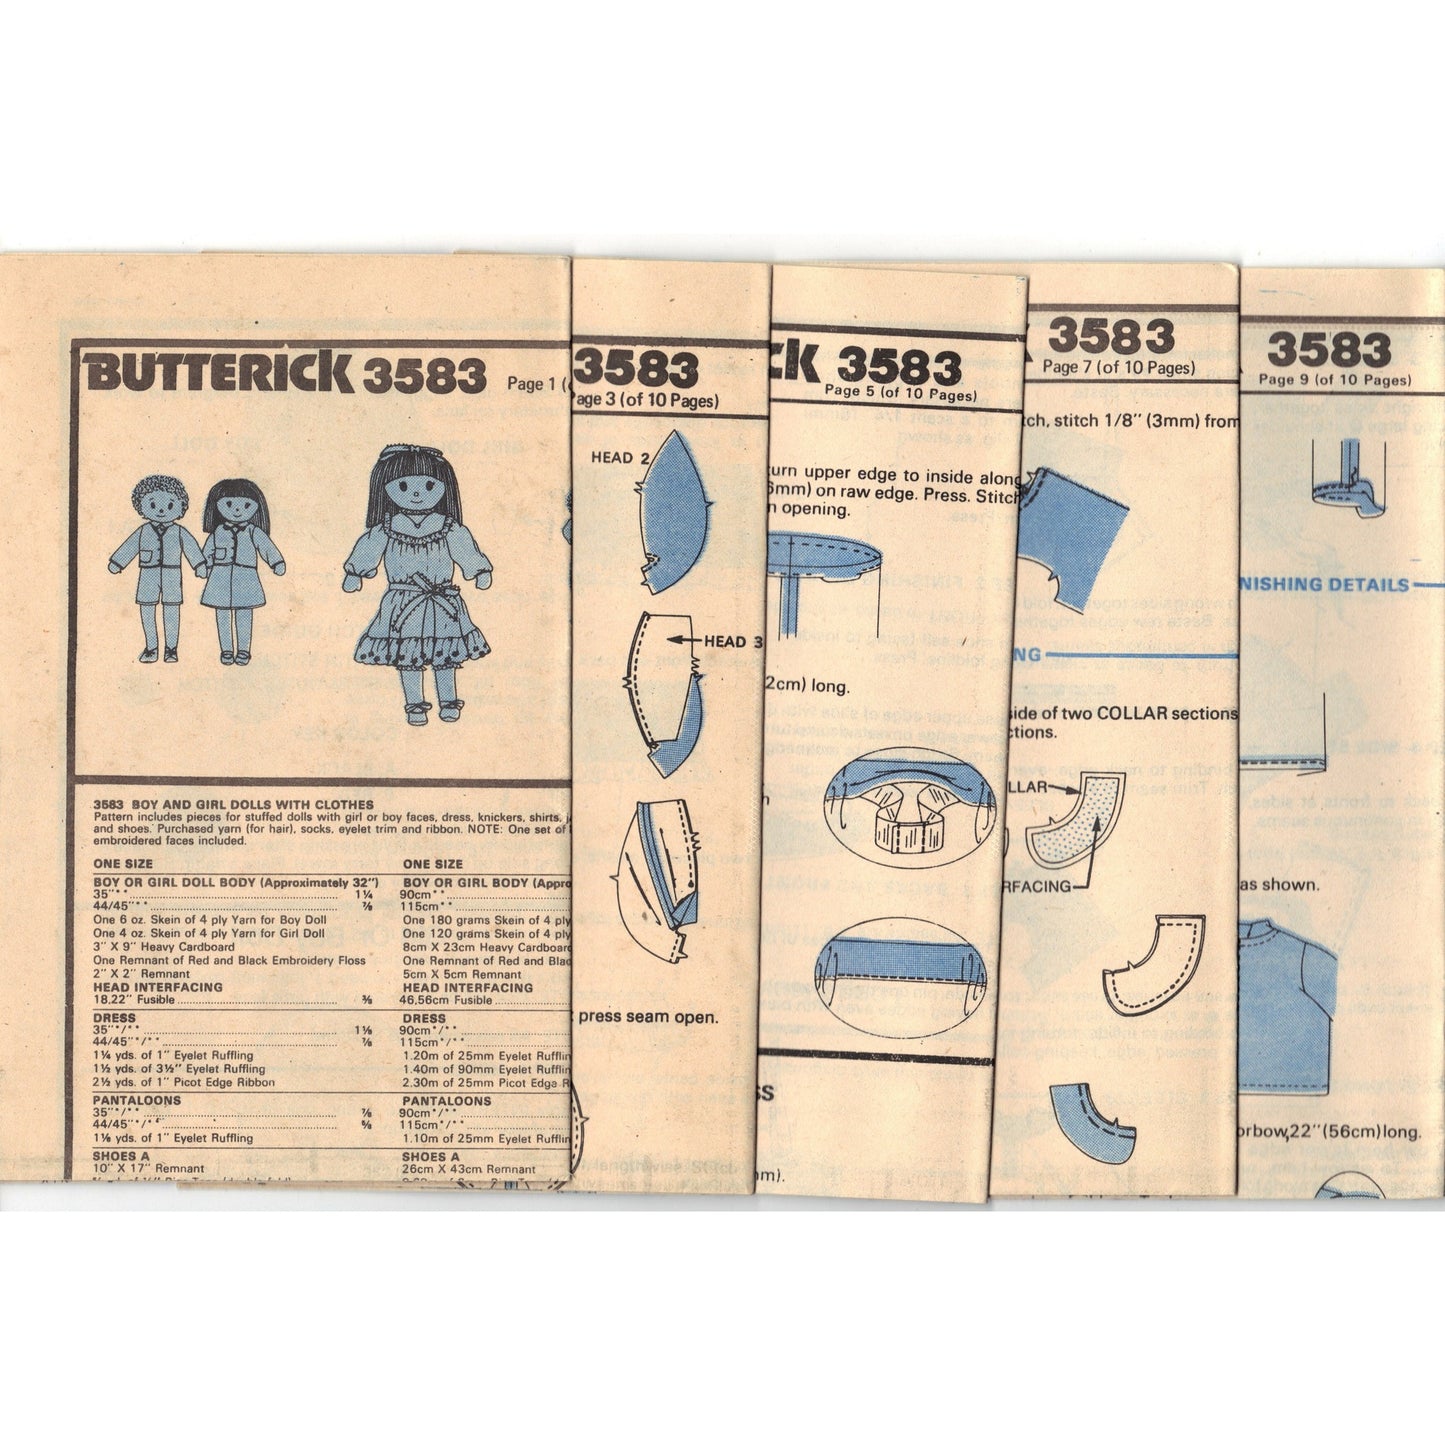 Butterick 3583 Pattern Vintage Dolls 32 In Boy and Girl Craft Tool